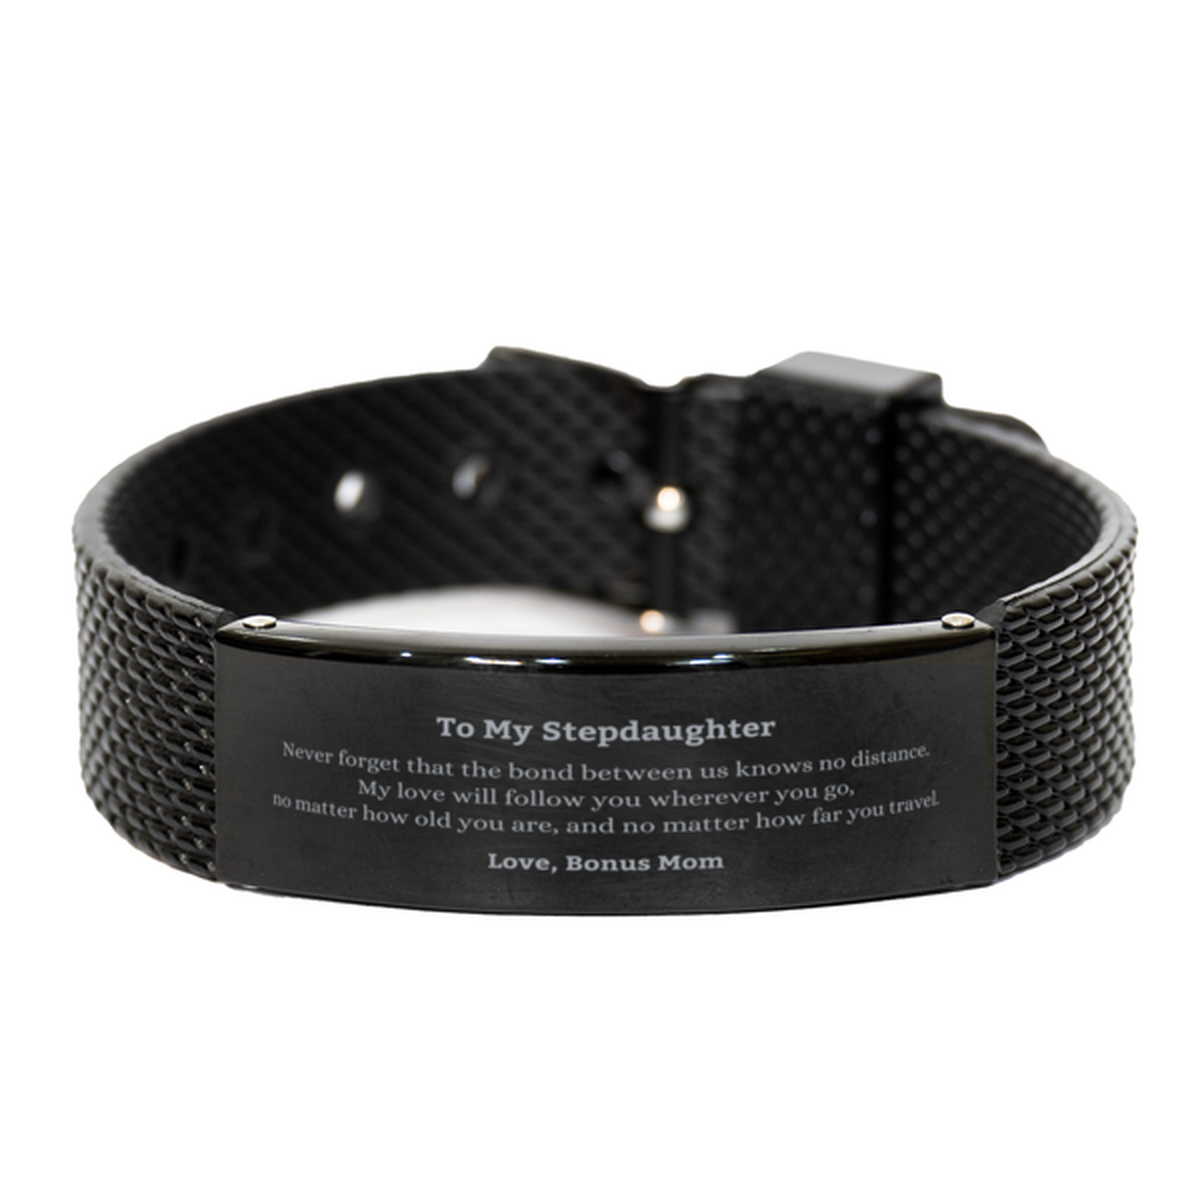 Stepdaughter Birthday Gifts from Bonus Mom, Adjustable Black Shark Mesh Bracelet for Stepdaughter Christmas Graduation Unique Gifts Stepdaughter Never forget that the bond between us knows no distance. Love, Bonus Mom